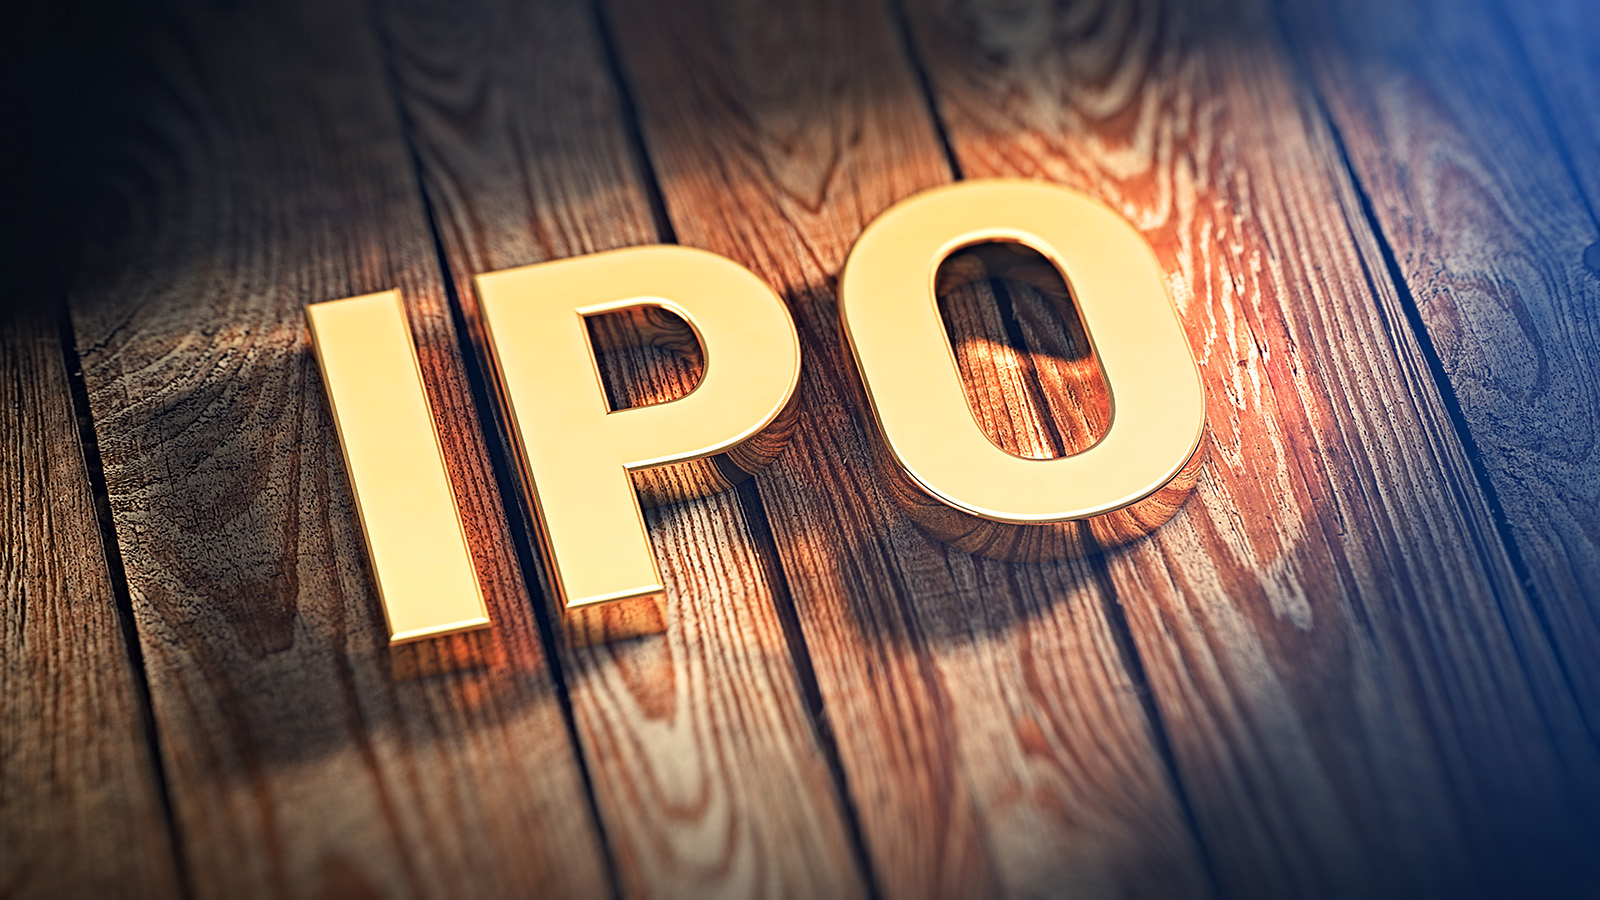 What is IPO Process in India? 7 Steps of Initial Public Offering!